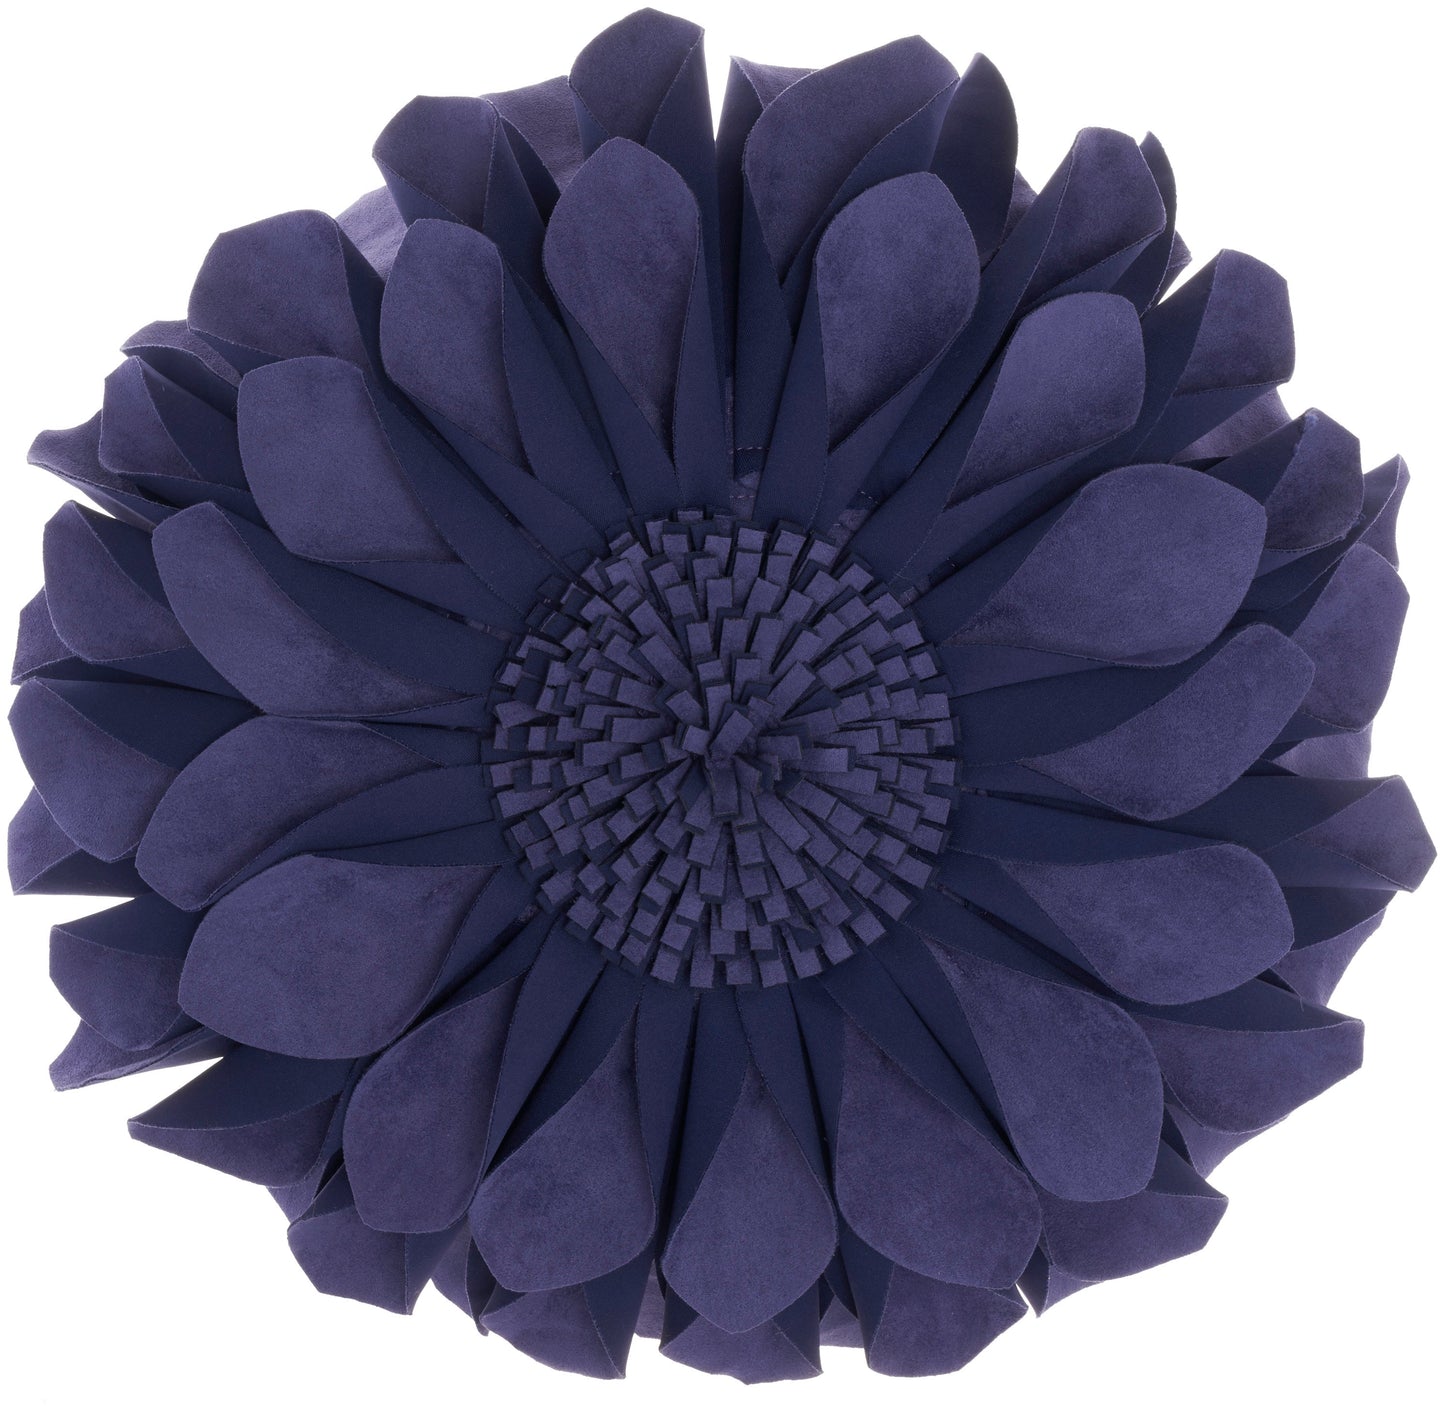 Sofia L0374 Synthetic Blend Suedette Flower Throw Pillow From Mina Victory By Nourison Rugs